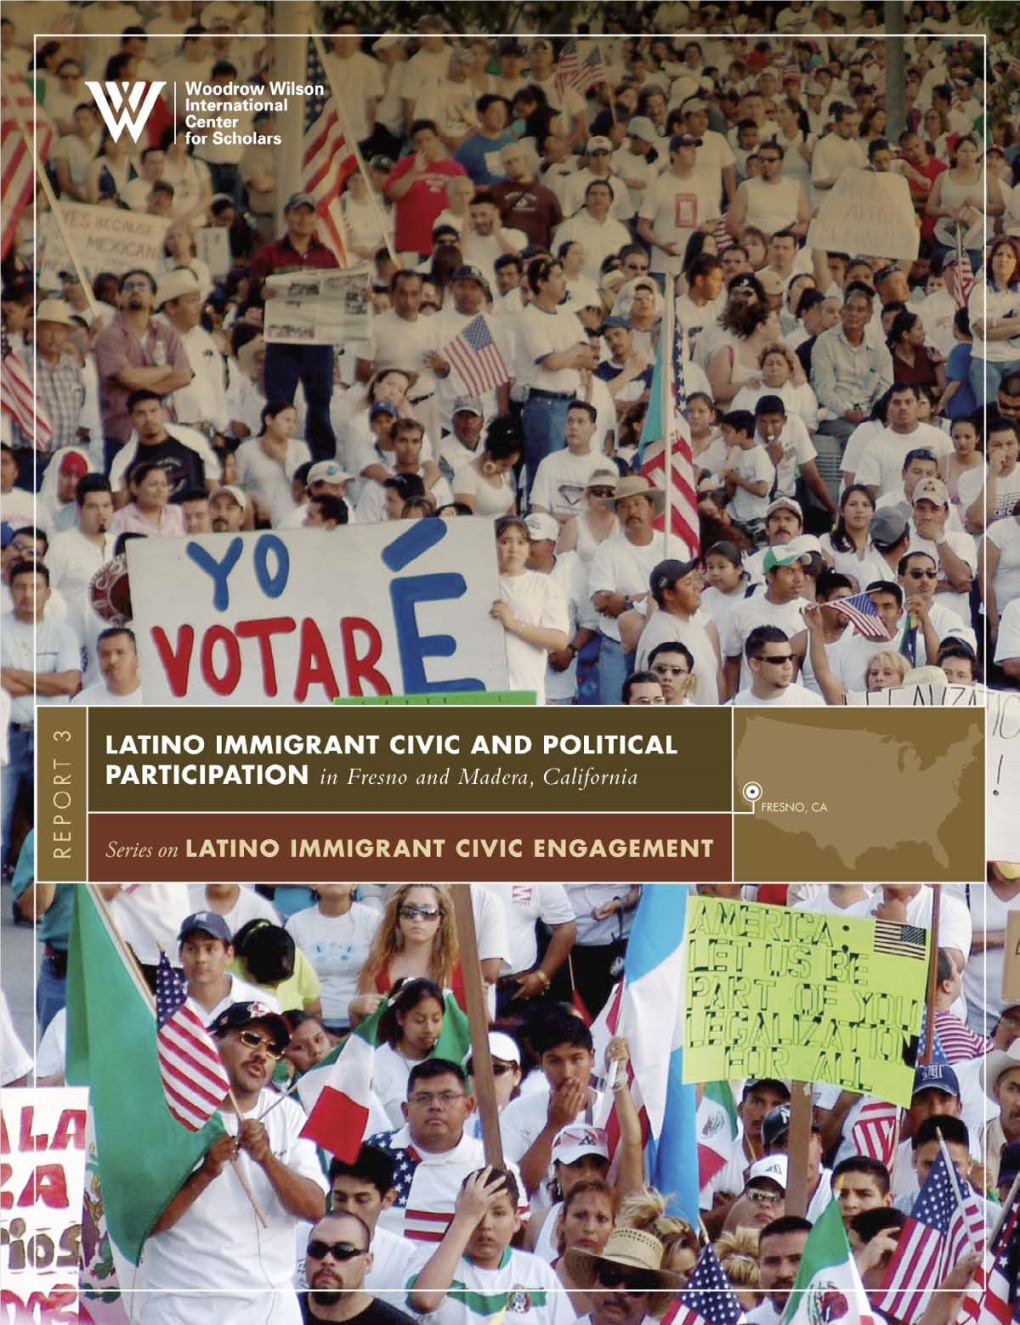 Latino Immigrant Civic and Political Participation in Fresno and Madera, California